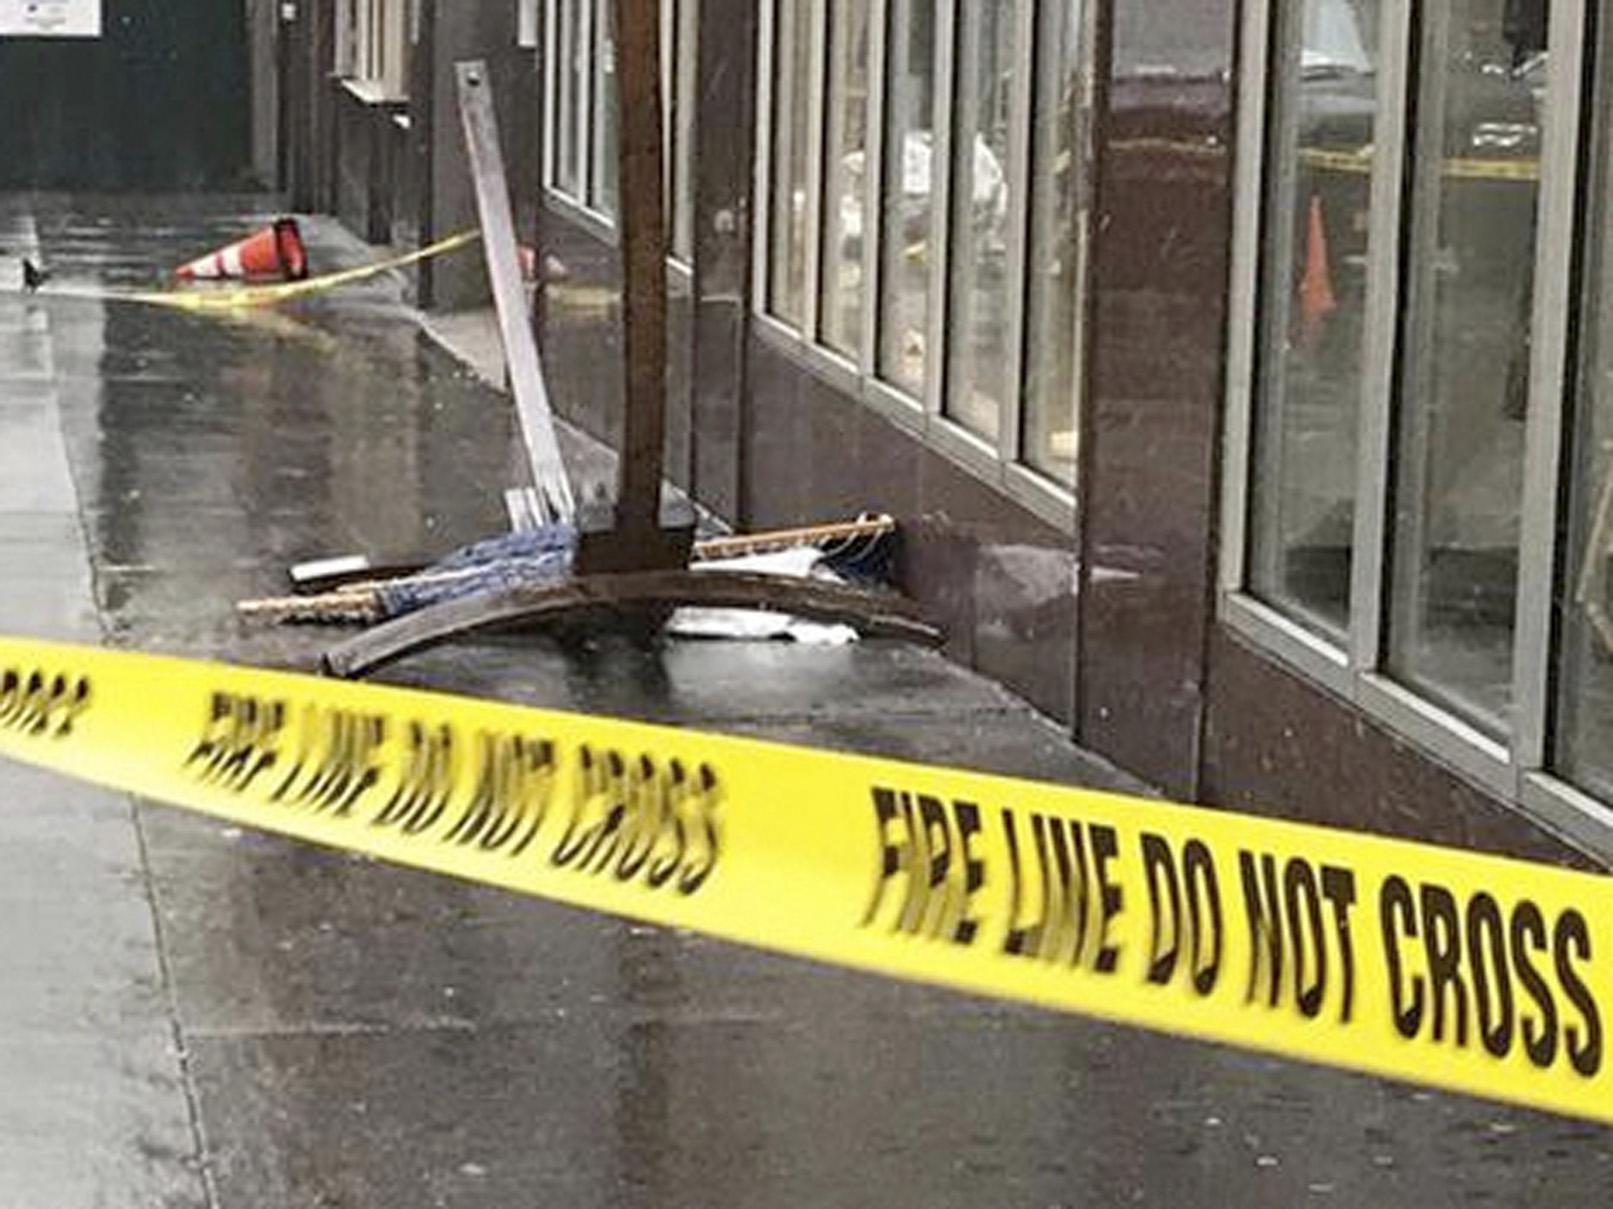 A wooden-framed hammock fell from a fifth-floor roof terrace in New York, seriously injuring a British woman